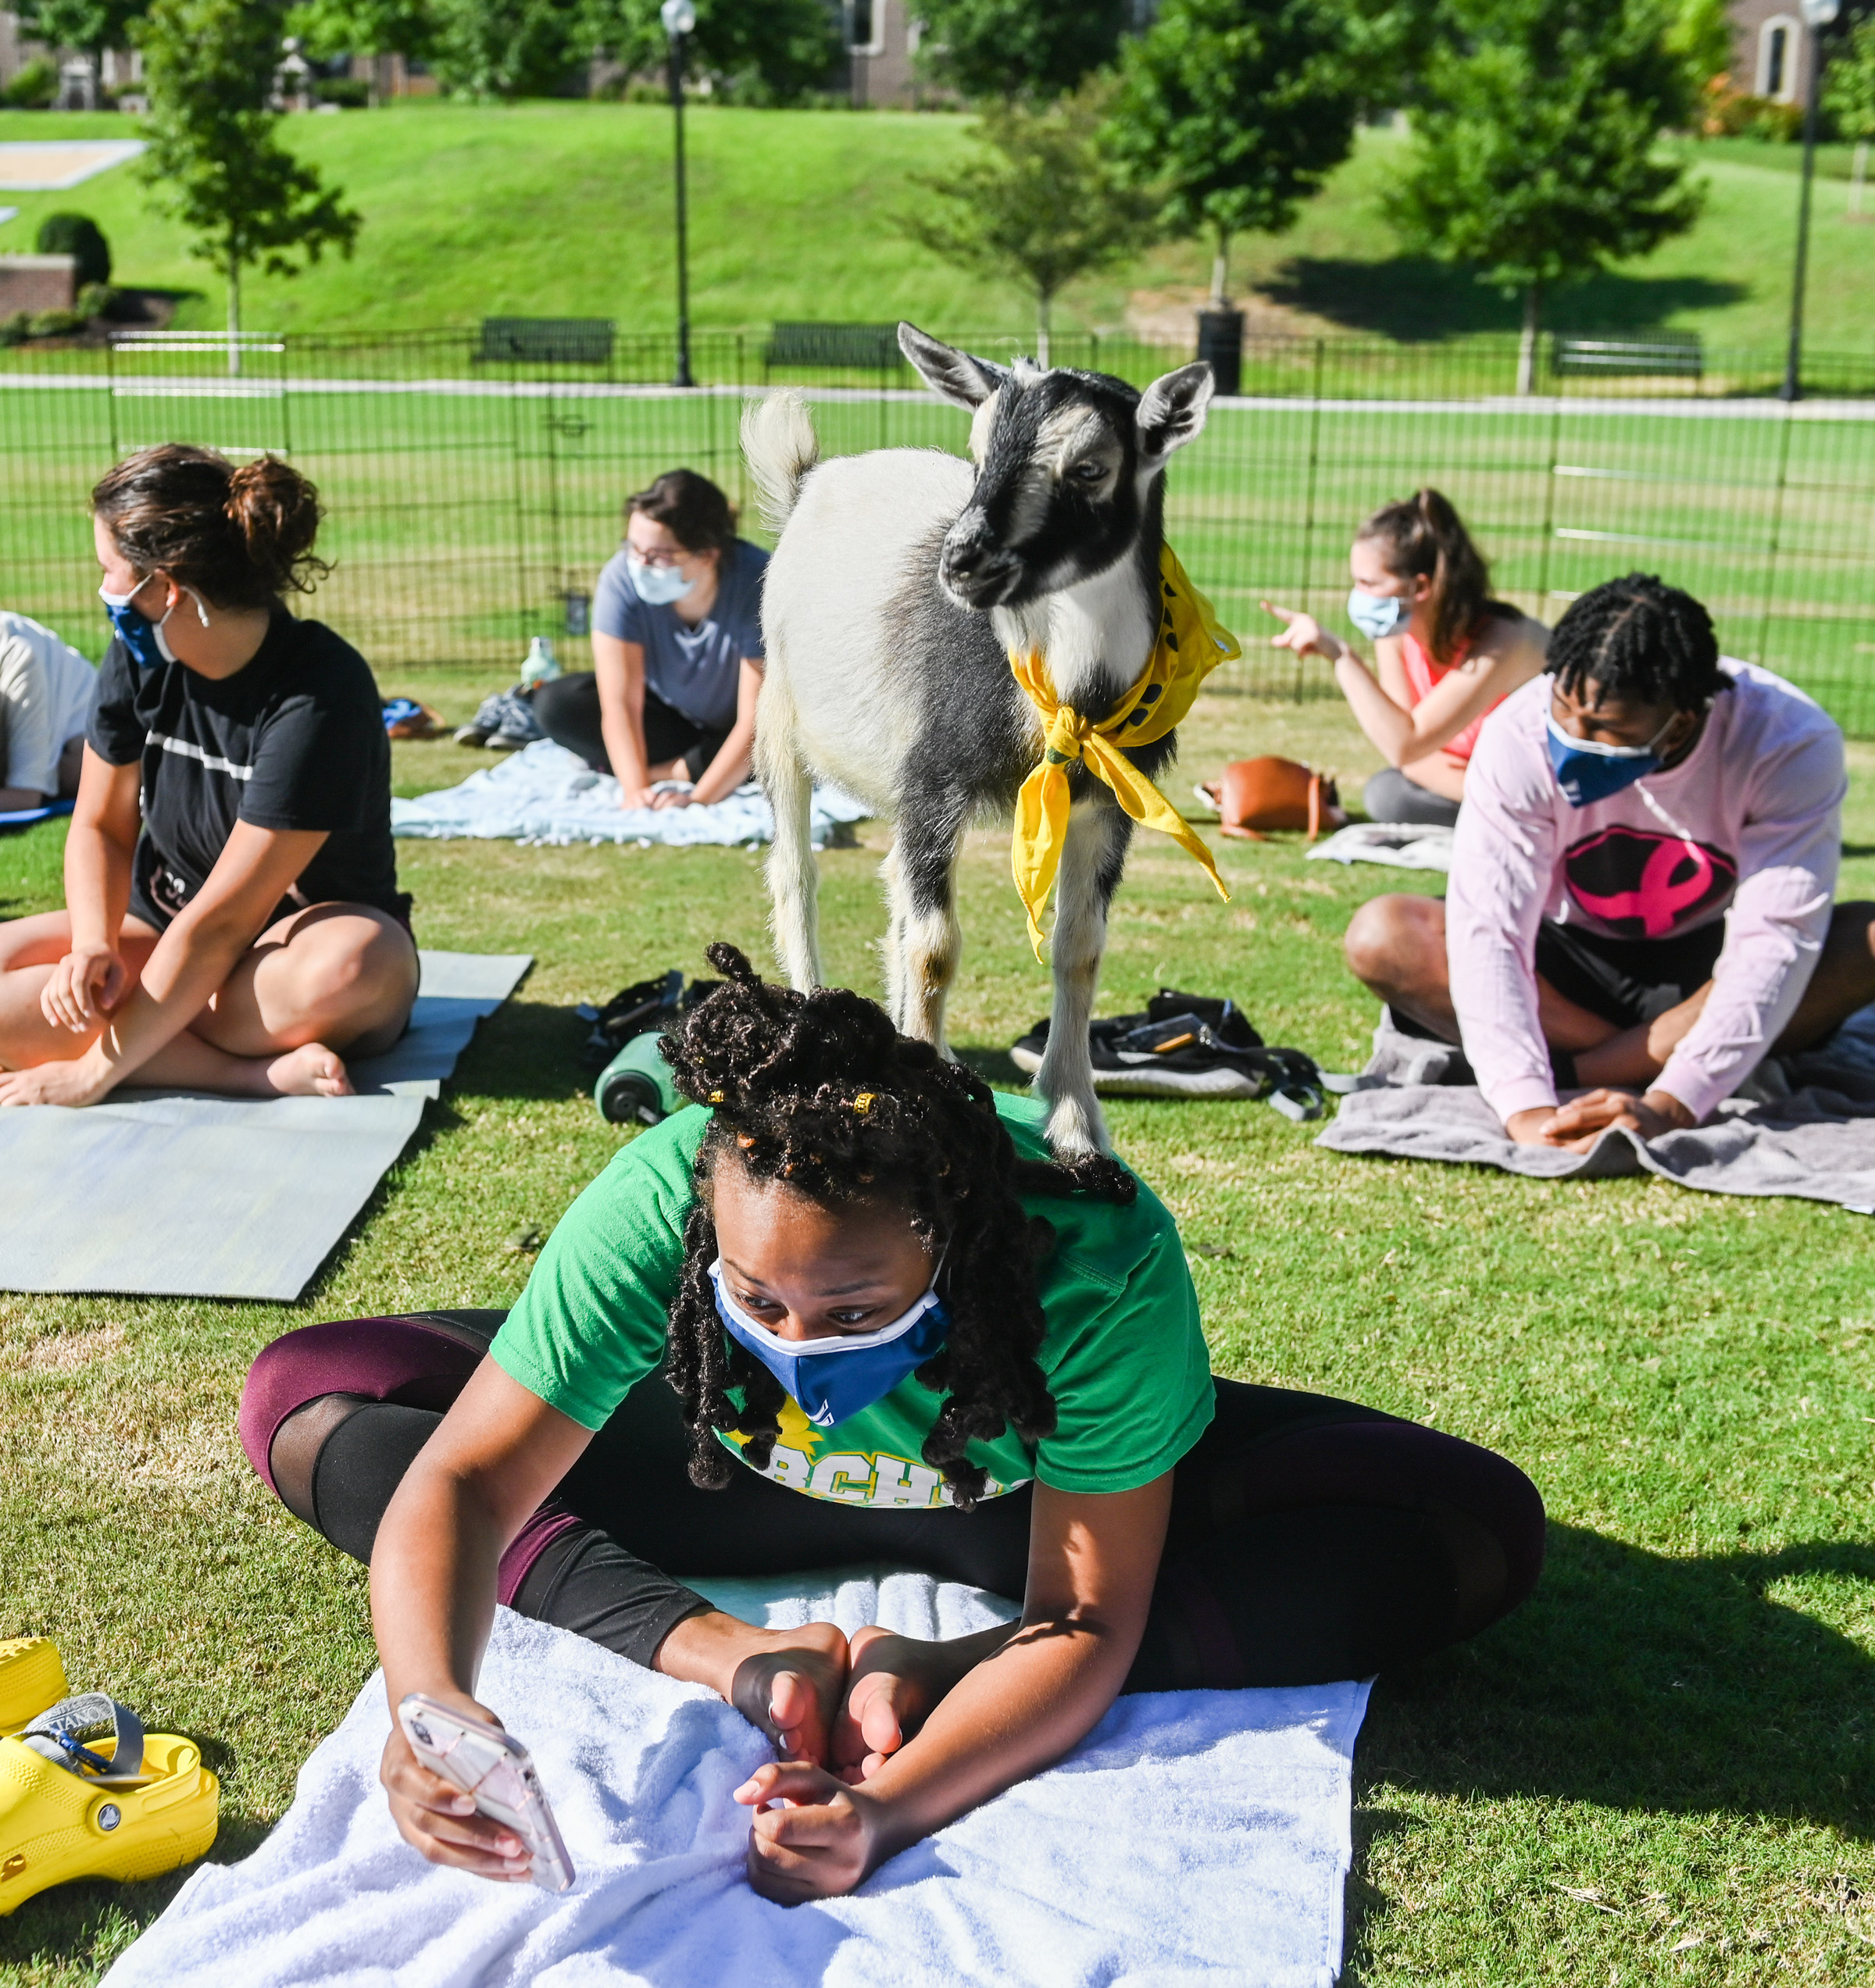 Student practice yoga poses on mats as a goat wanders around